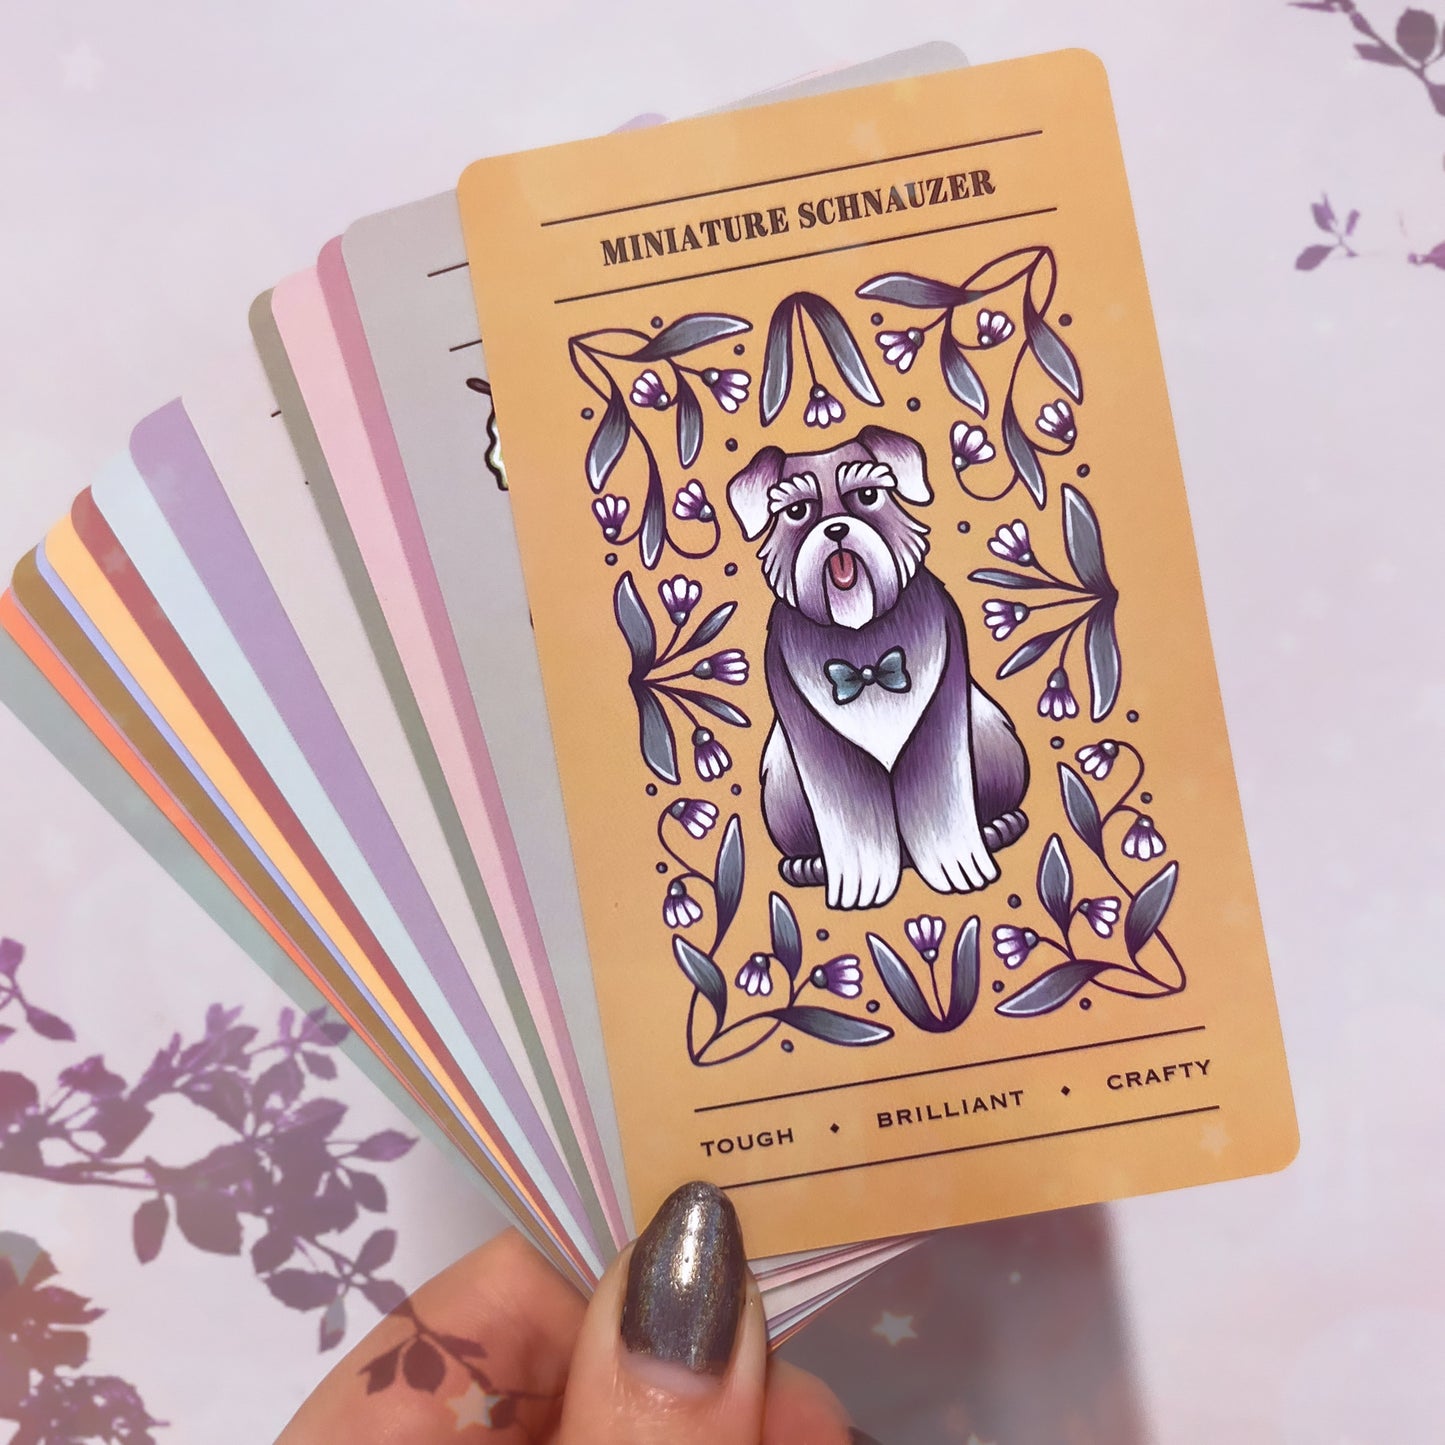 Happy Tails Oracle – dog divination deck